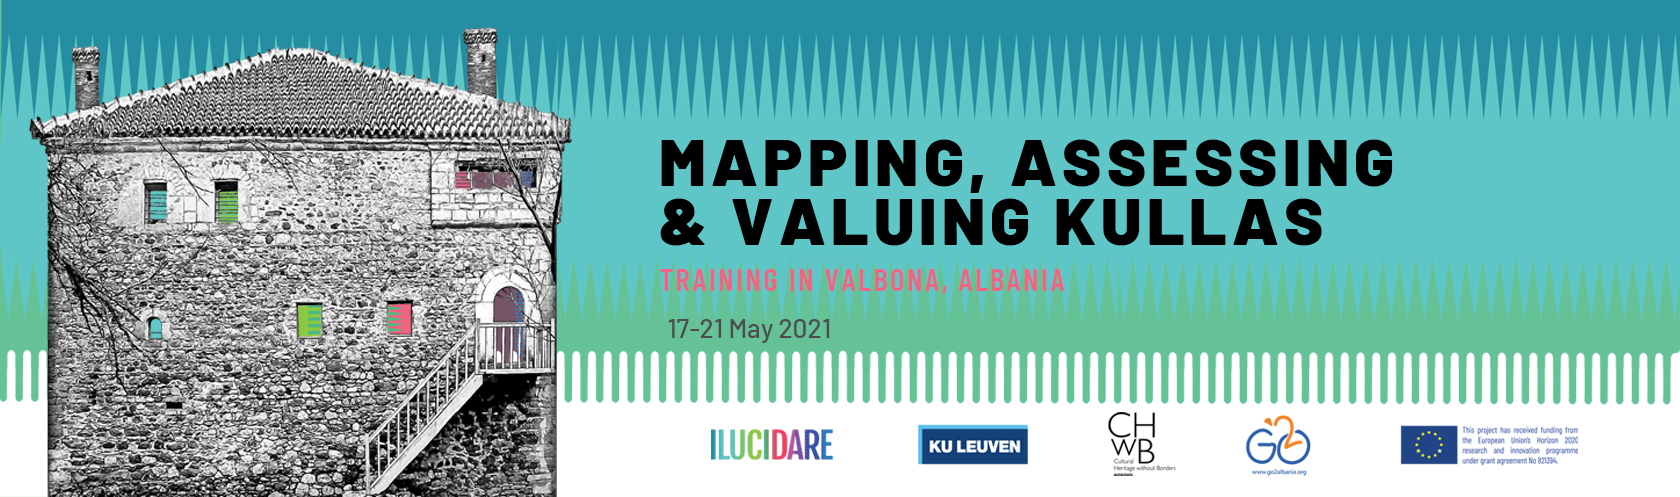 CALL FOR APPLICATION: “MAPPING, ASSESSING AND VALUING KULLAS” TRAINING